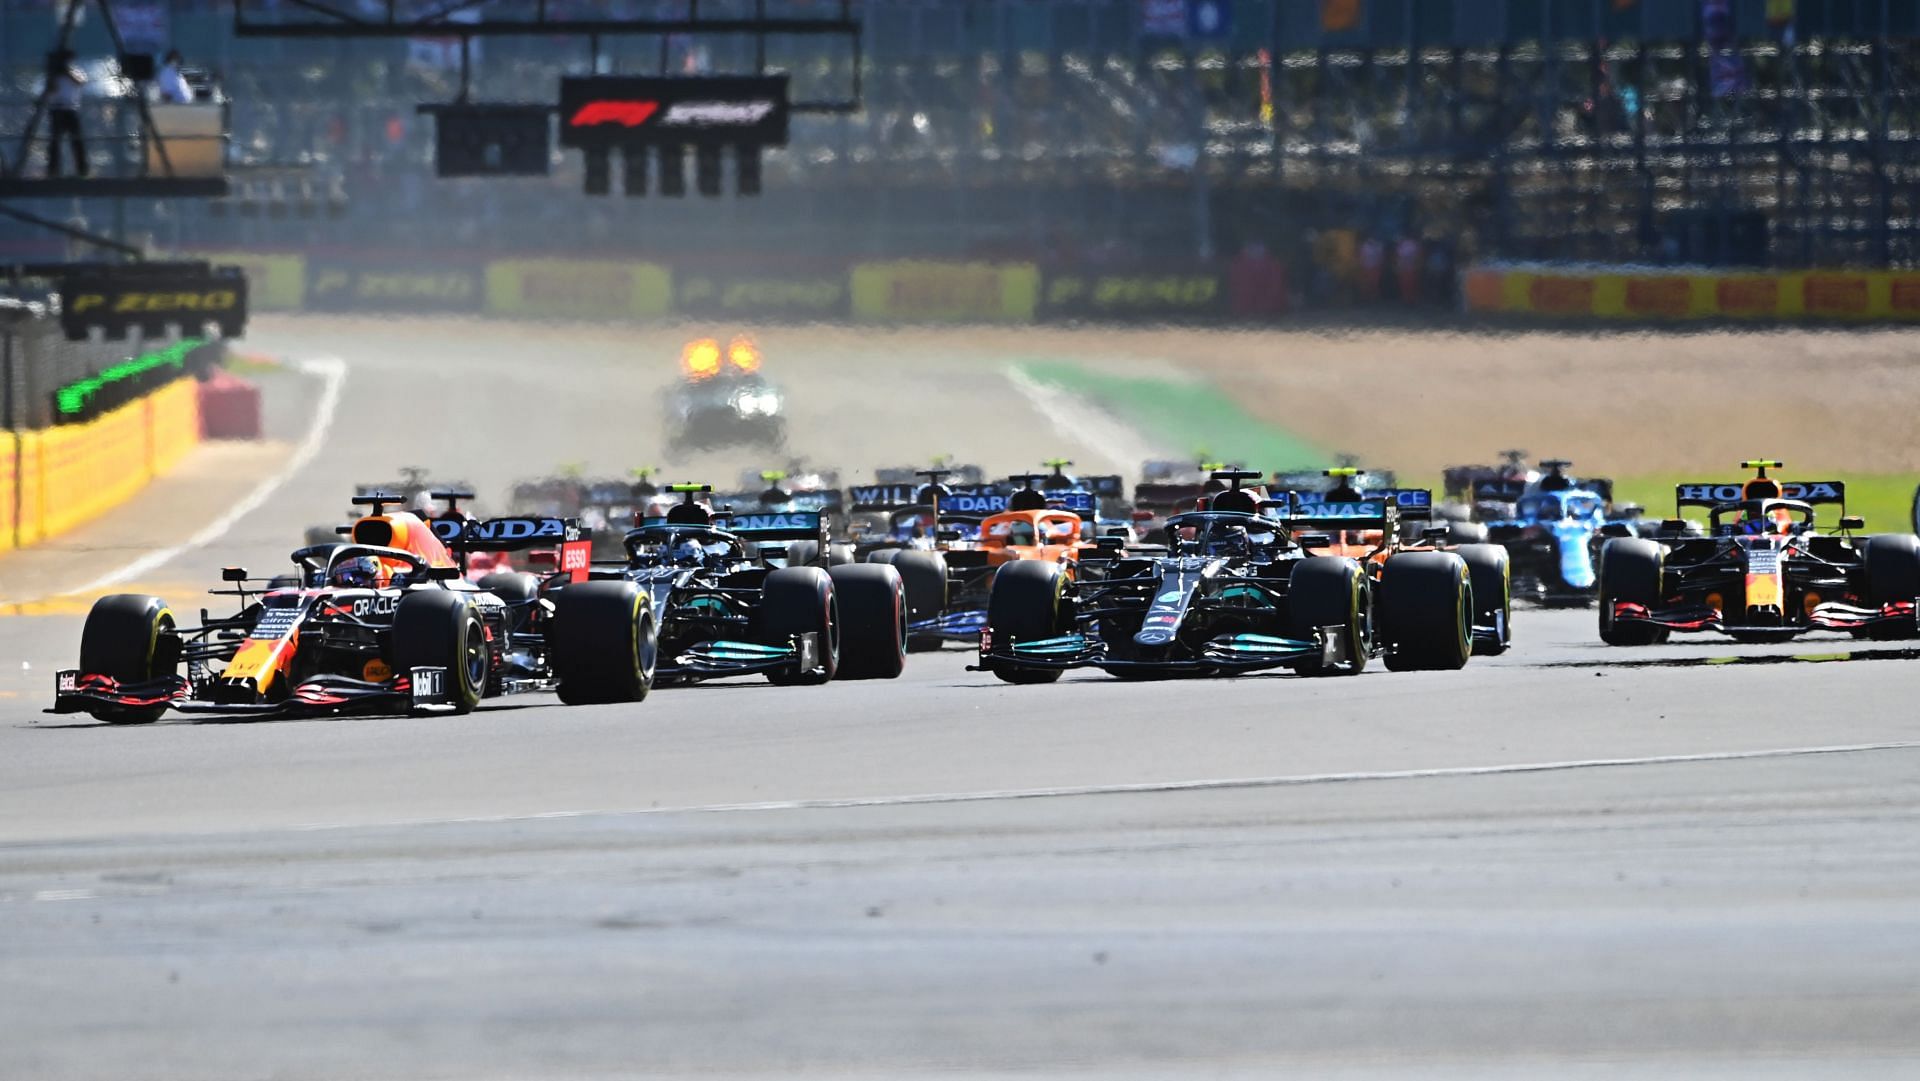 F1 Grand Prix of Great Britain - Sprint races will be a big part of the new DTS season